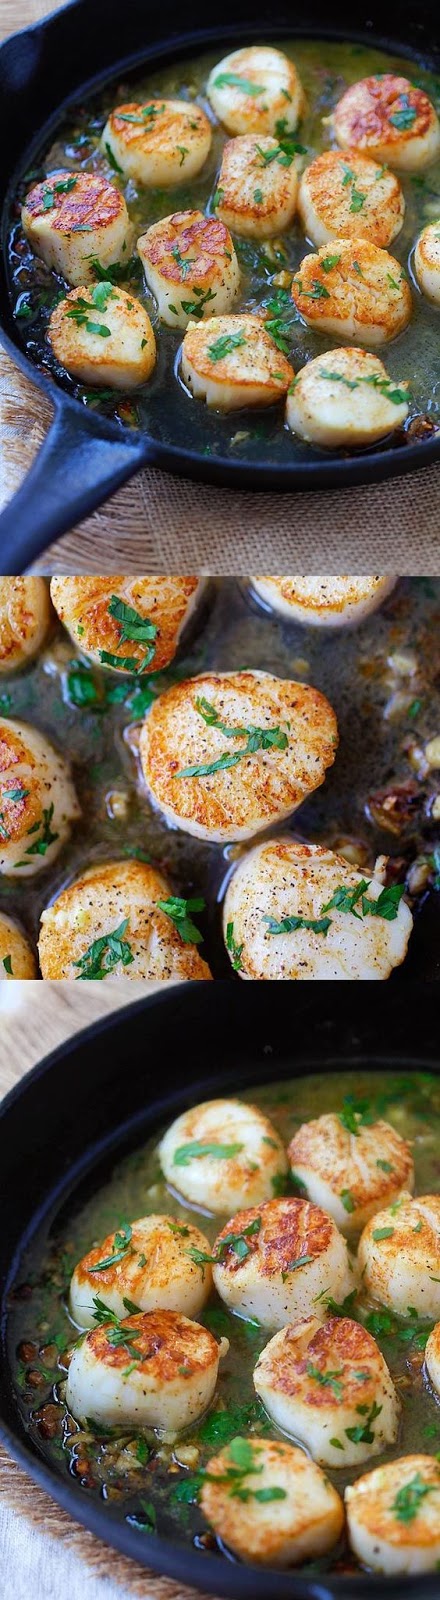 Garlic Scallops – fresh, succulent scallops sauteed with garlic, butter, white wine and parsley. Easy recipe that takes only 15 mins! | rasamalaysia.com //Manbo